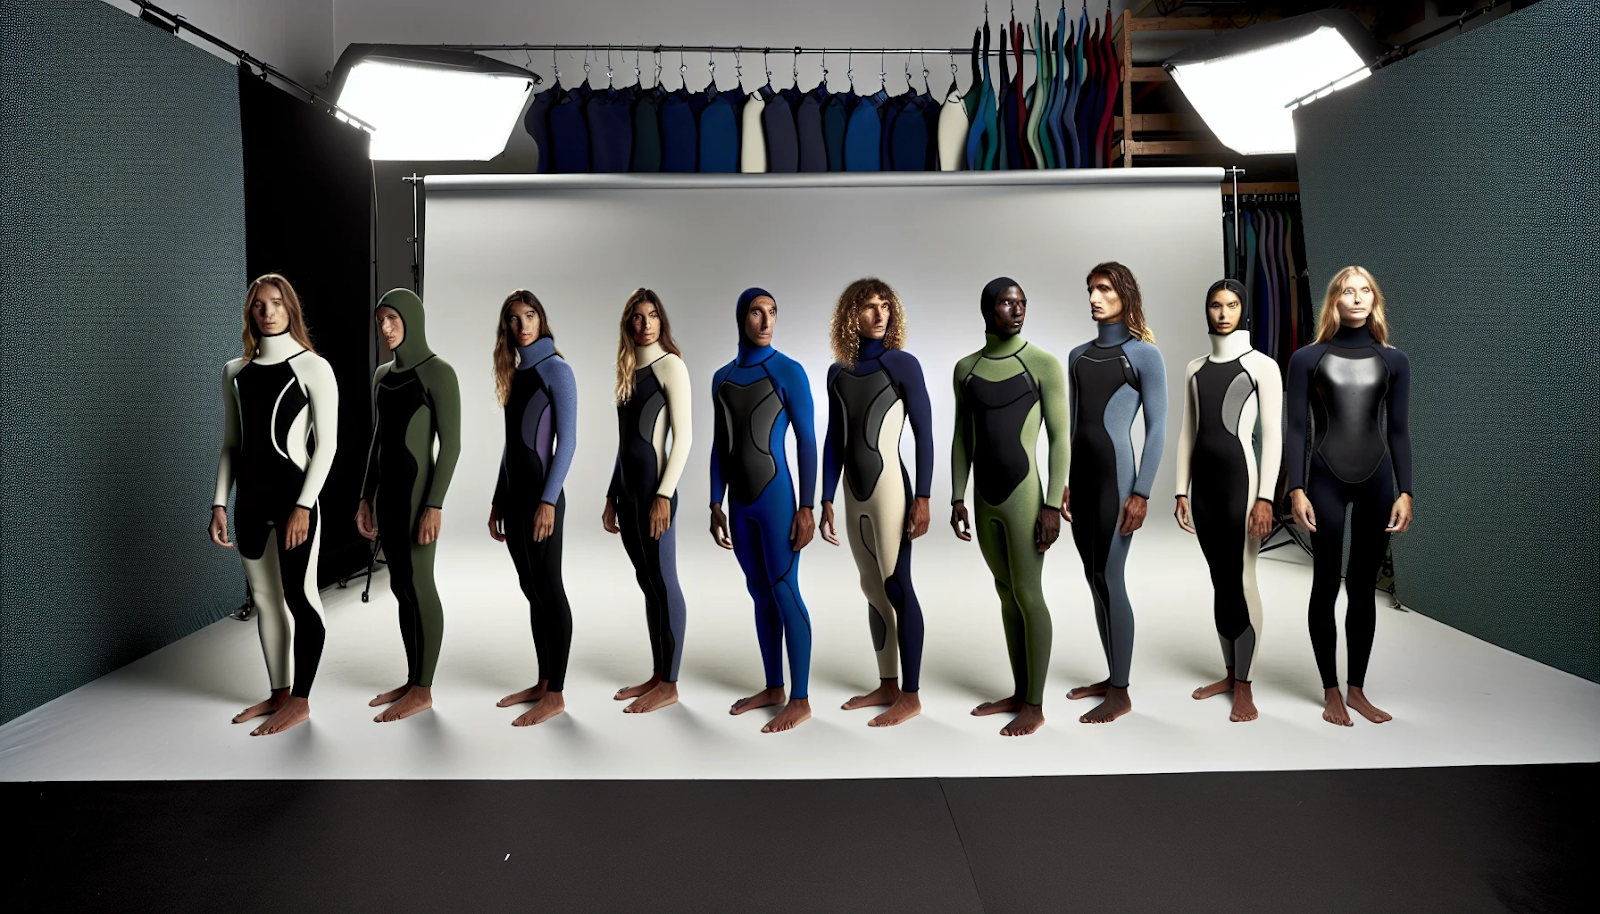 A collection of eco-friendly wetsuits made from alternative materials to traditional neoprene